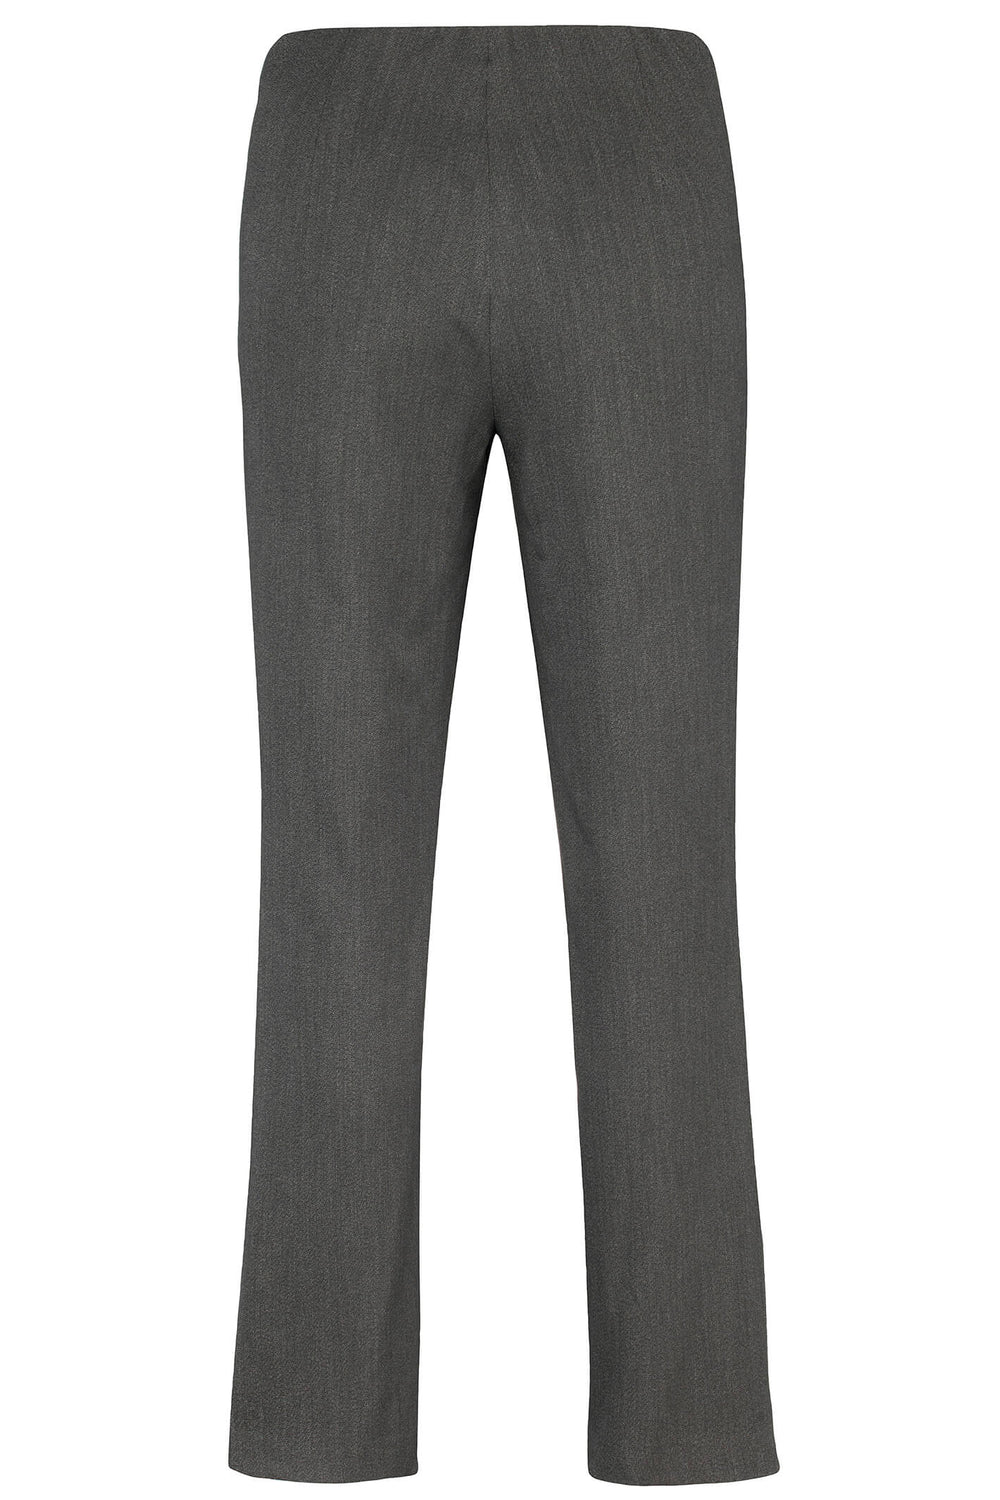 Robell 51408 199 Anthracite Jacklyn Woven Stretch Trousers - Experience Boutique